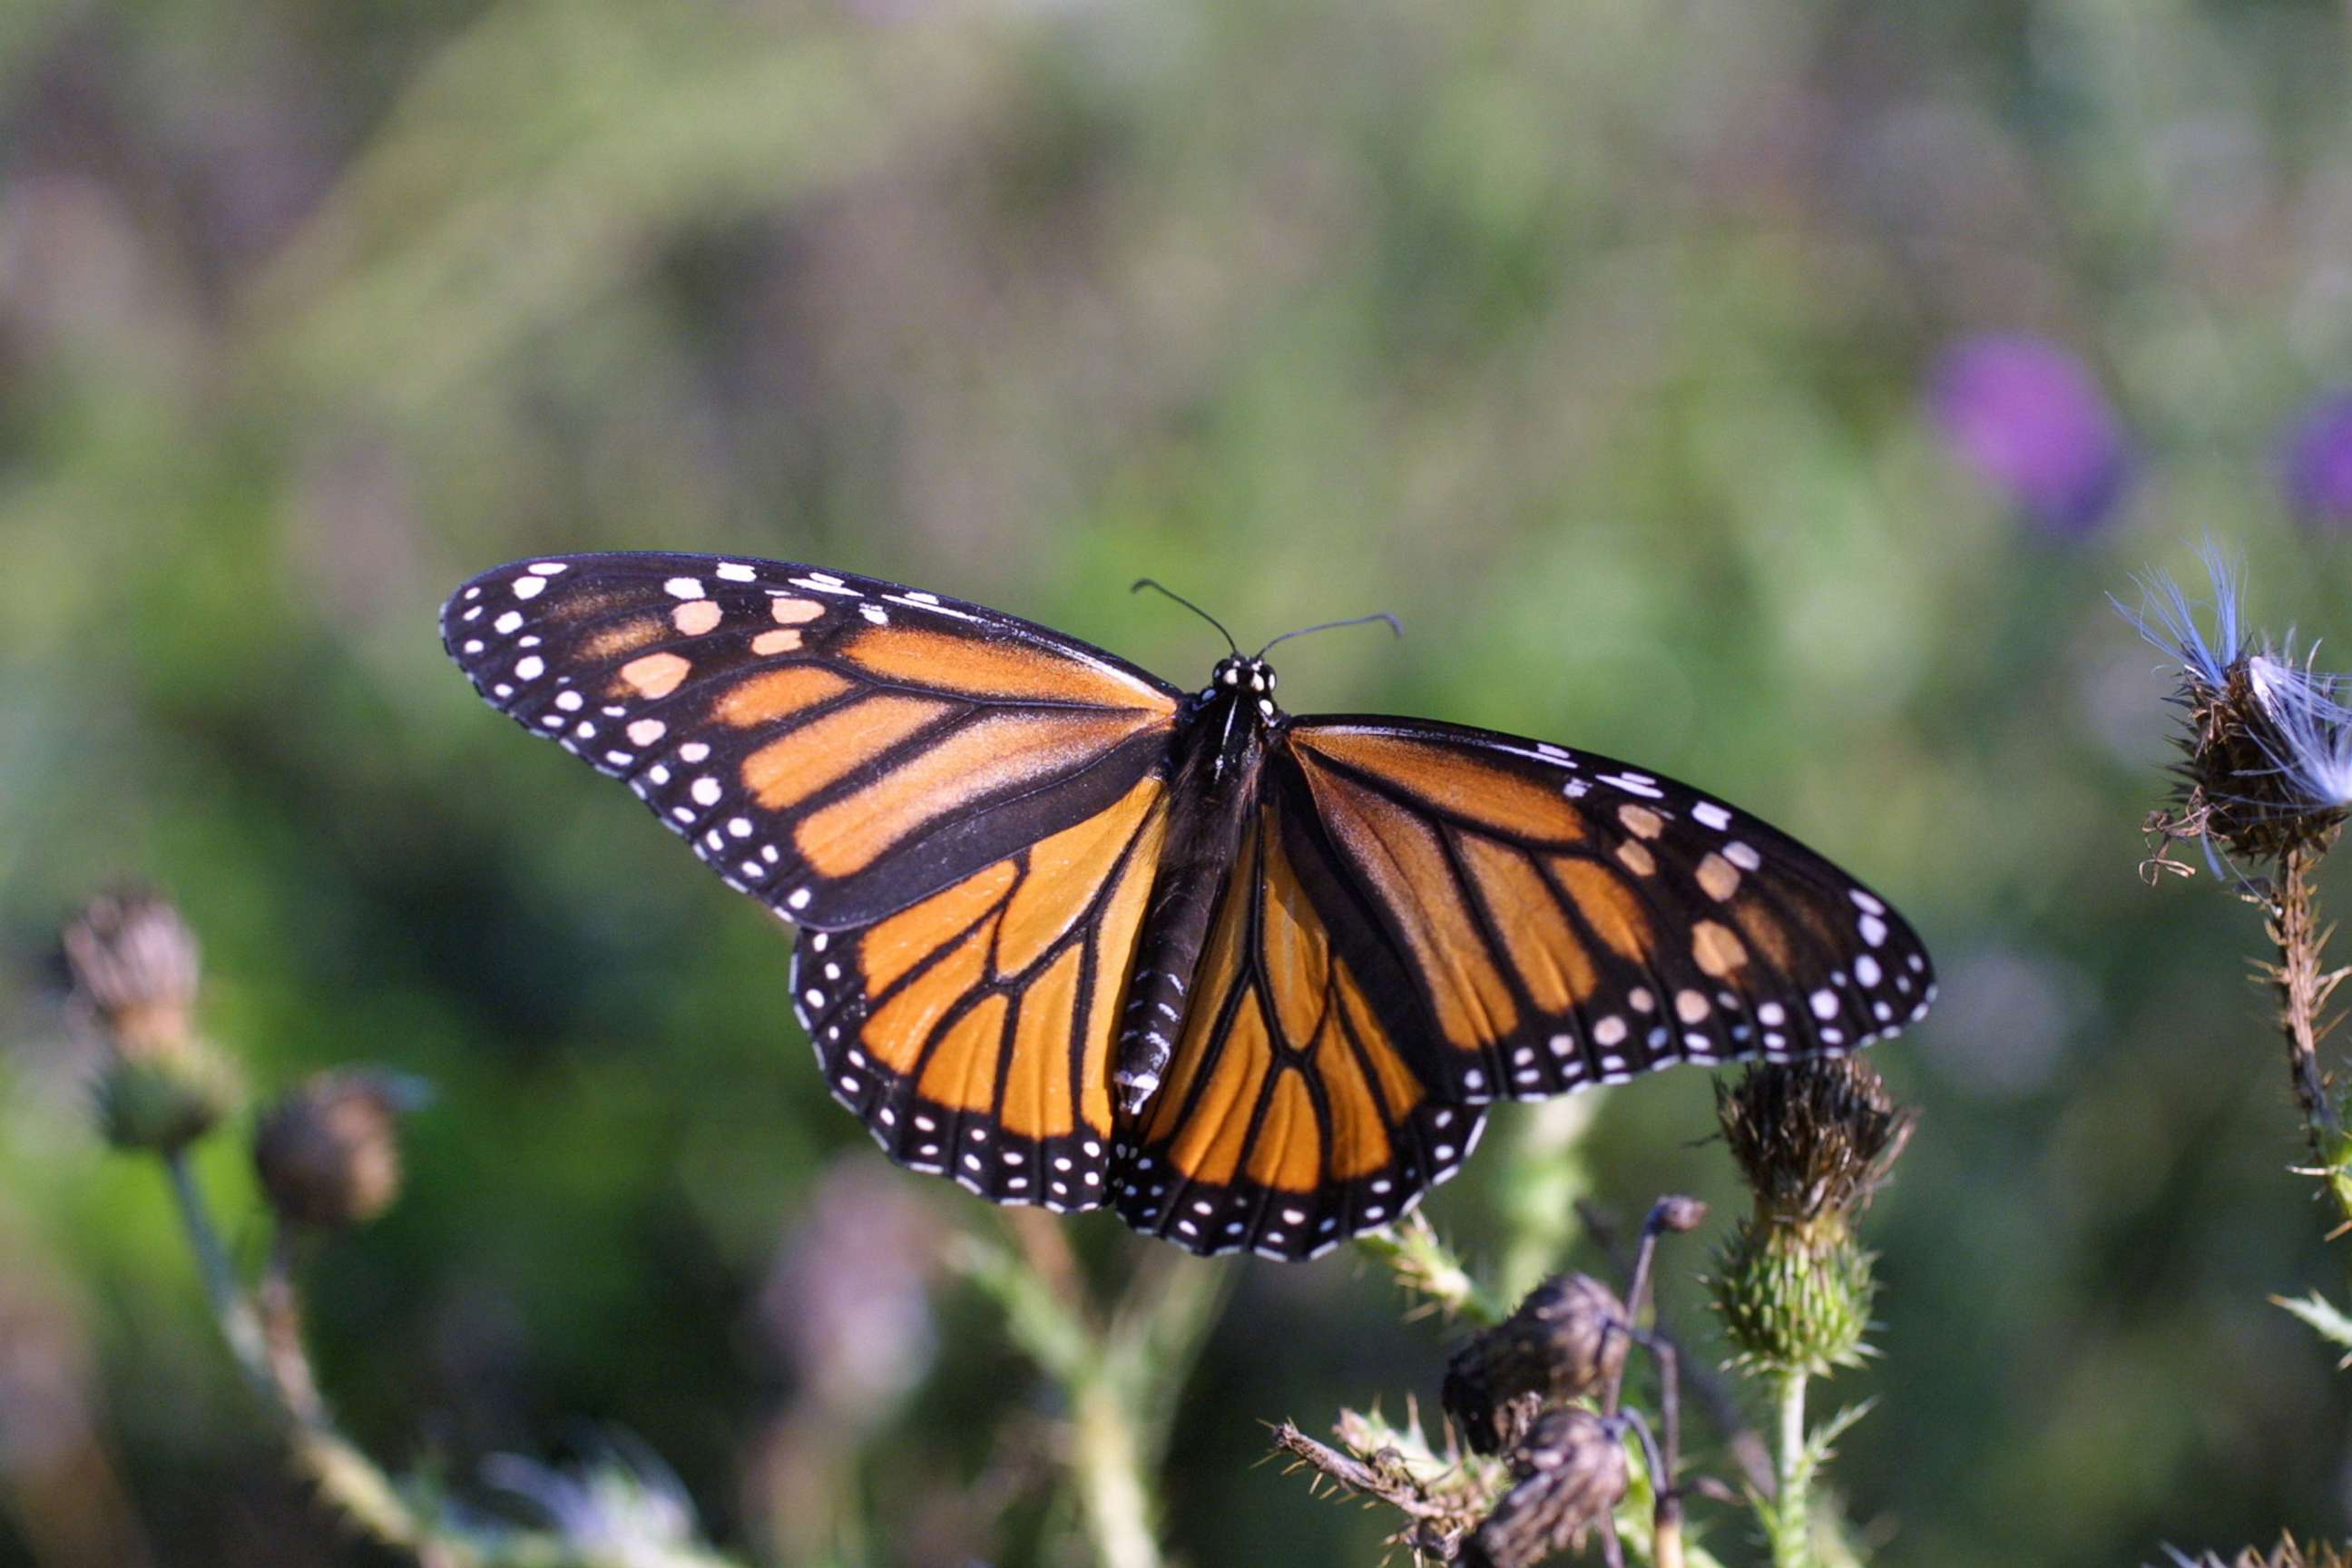 PHOTO: In this 2014, file photo, a monarch butterfly, an iconic pollinator species, alights on a plant.